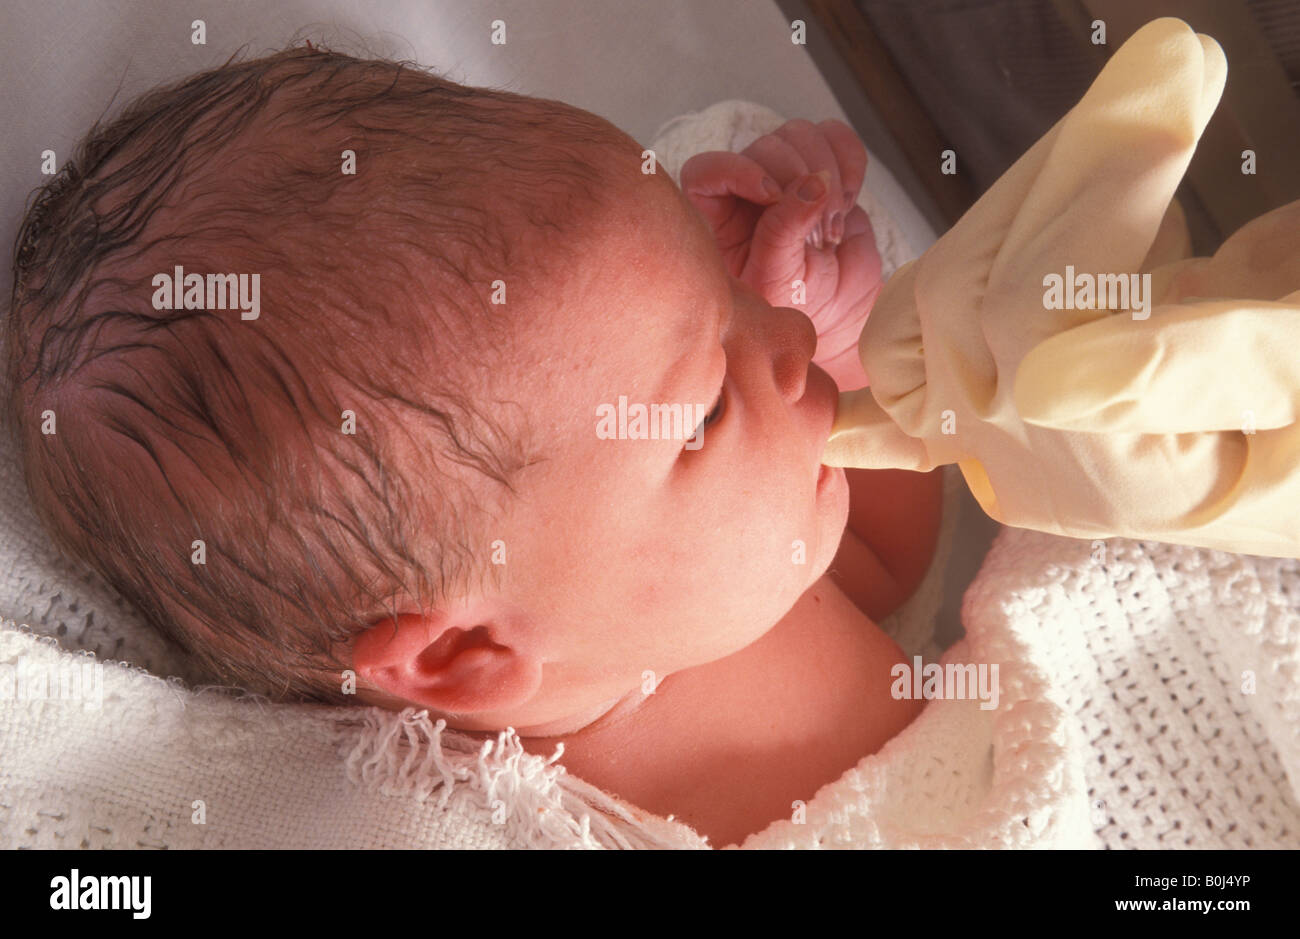 newborn baby born in hospital having roof of mouth checked by midwife Stock Photo